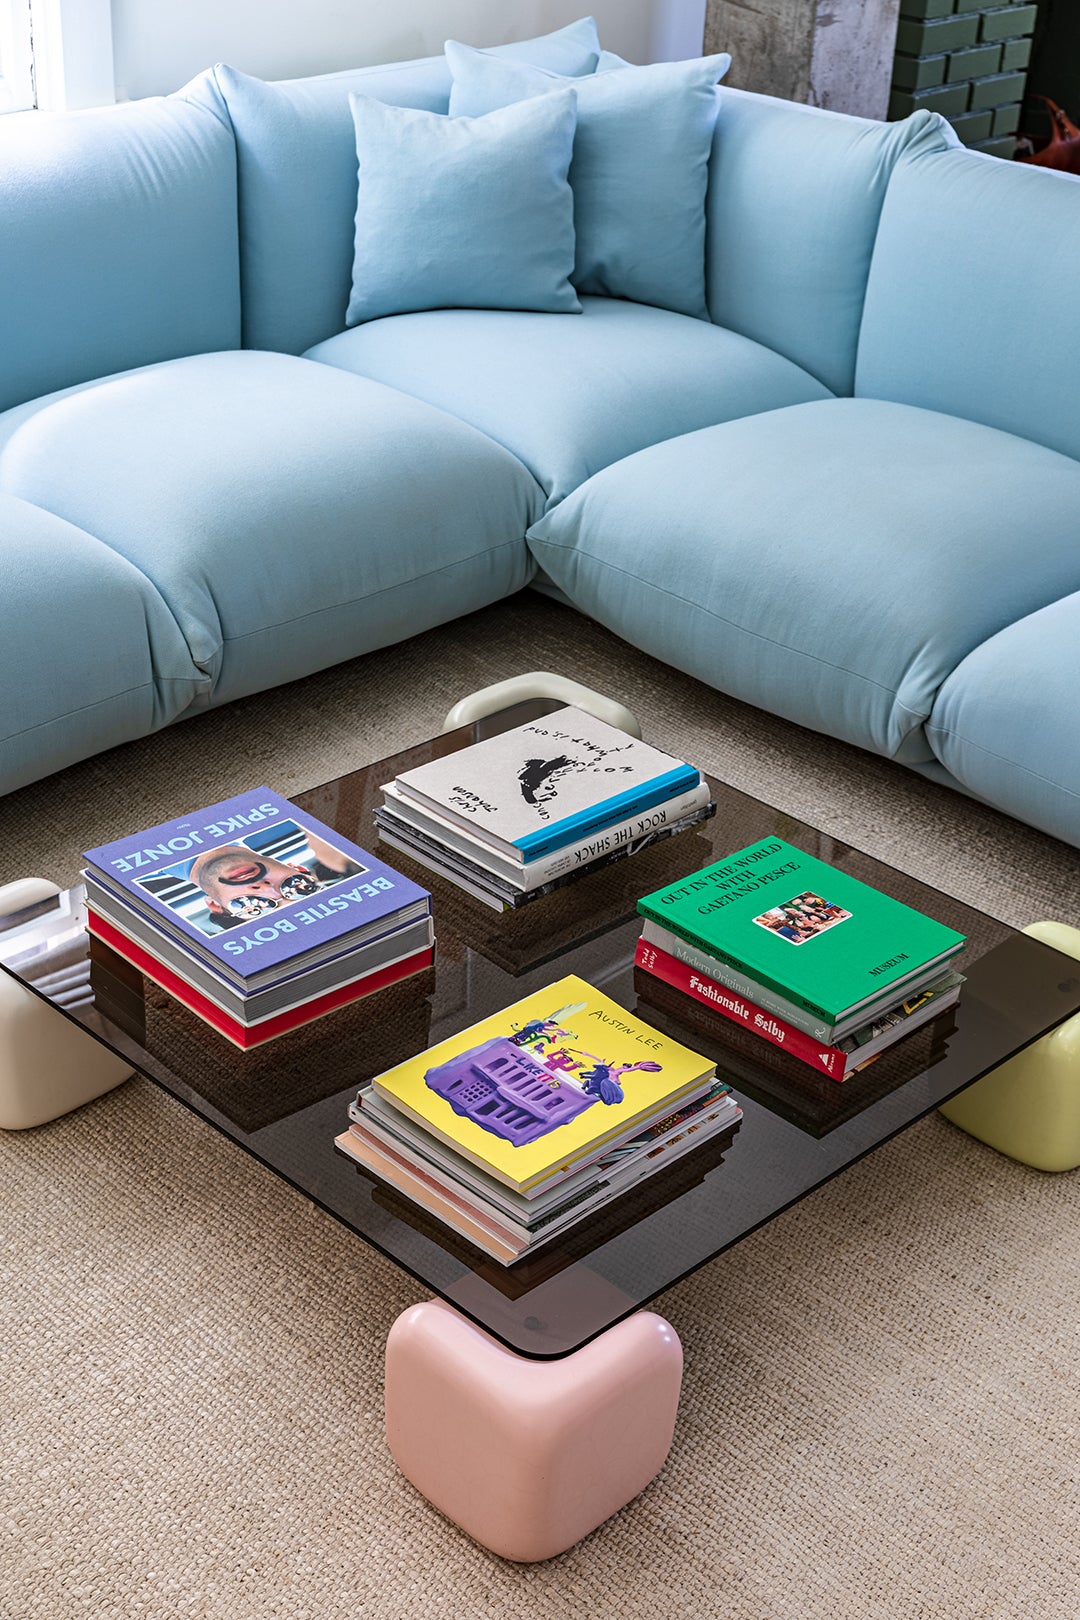 Coffee table with books